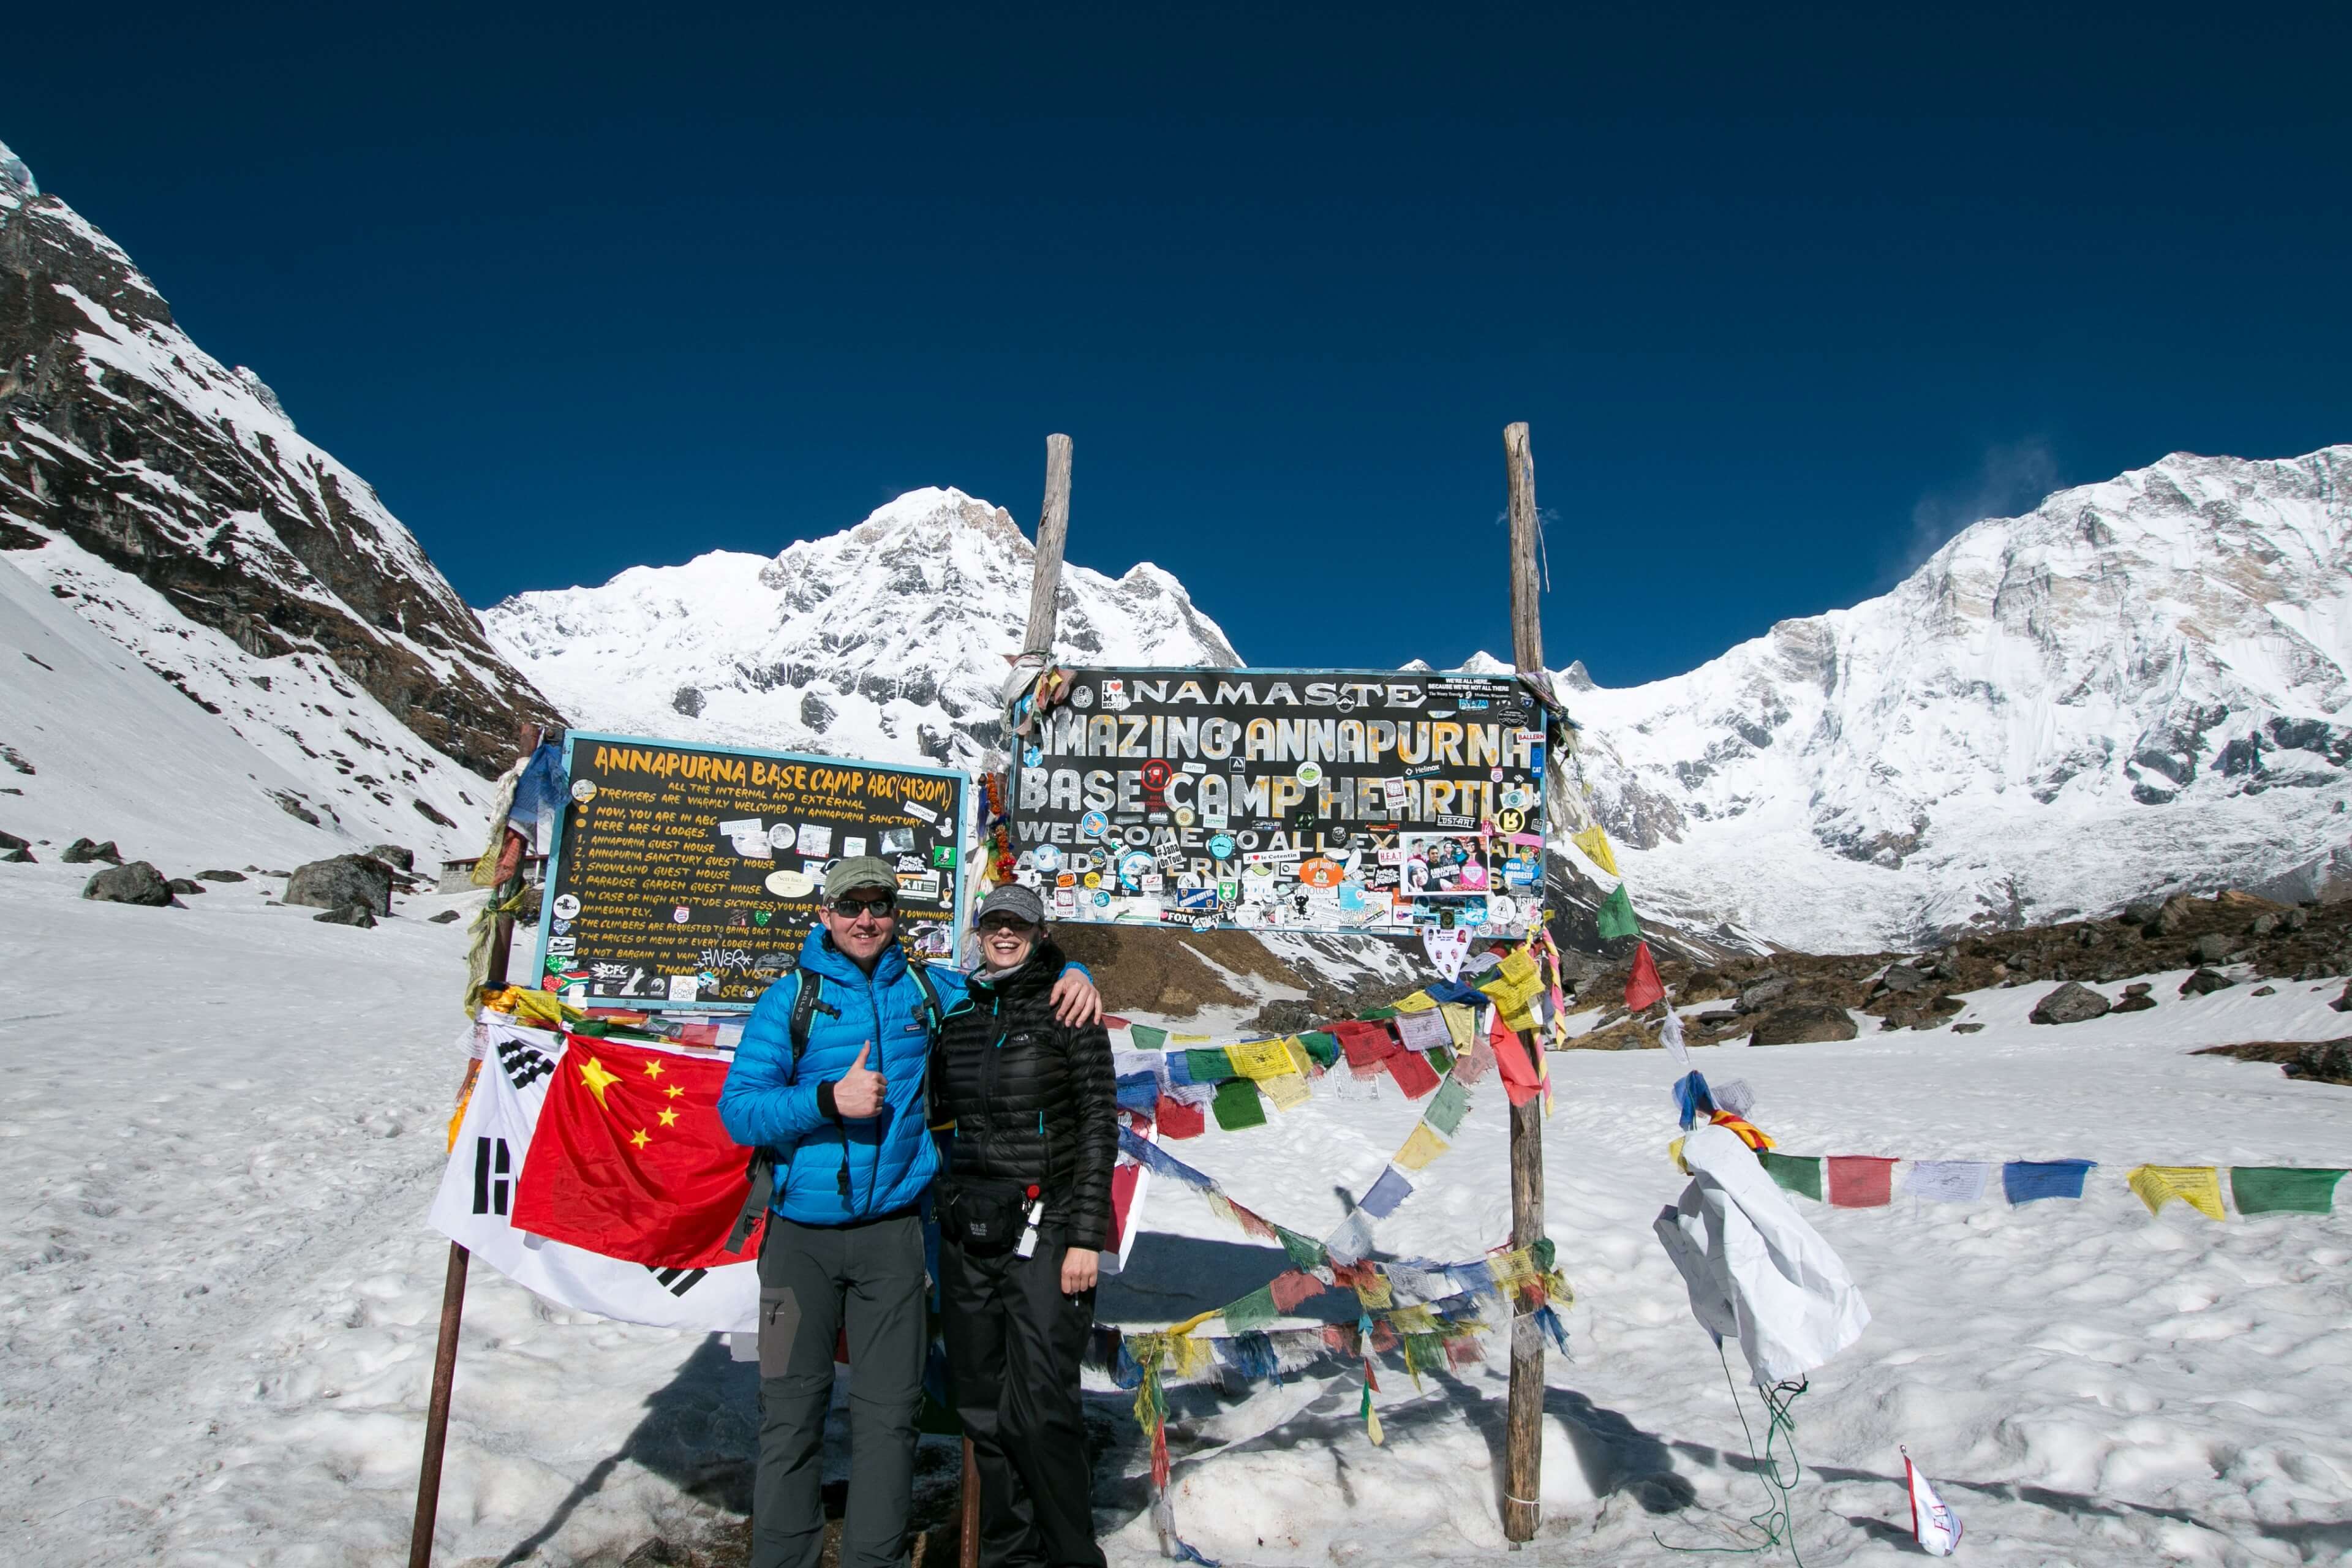 We Made It To Annapurna Base Camp  at 4130m